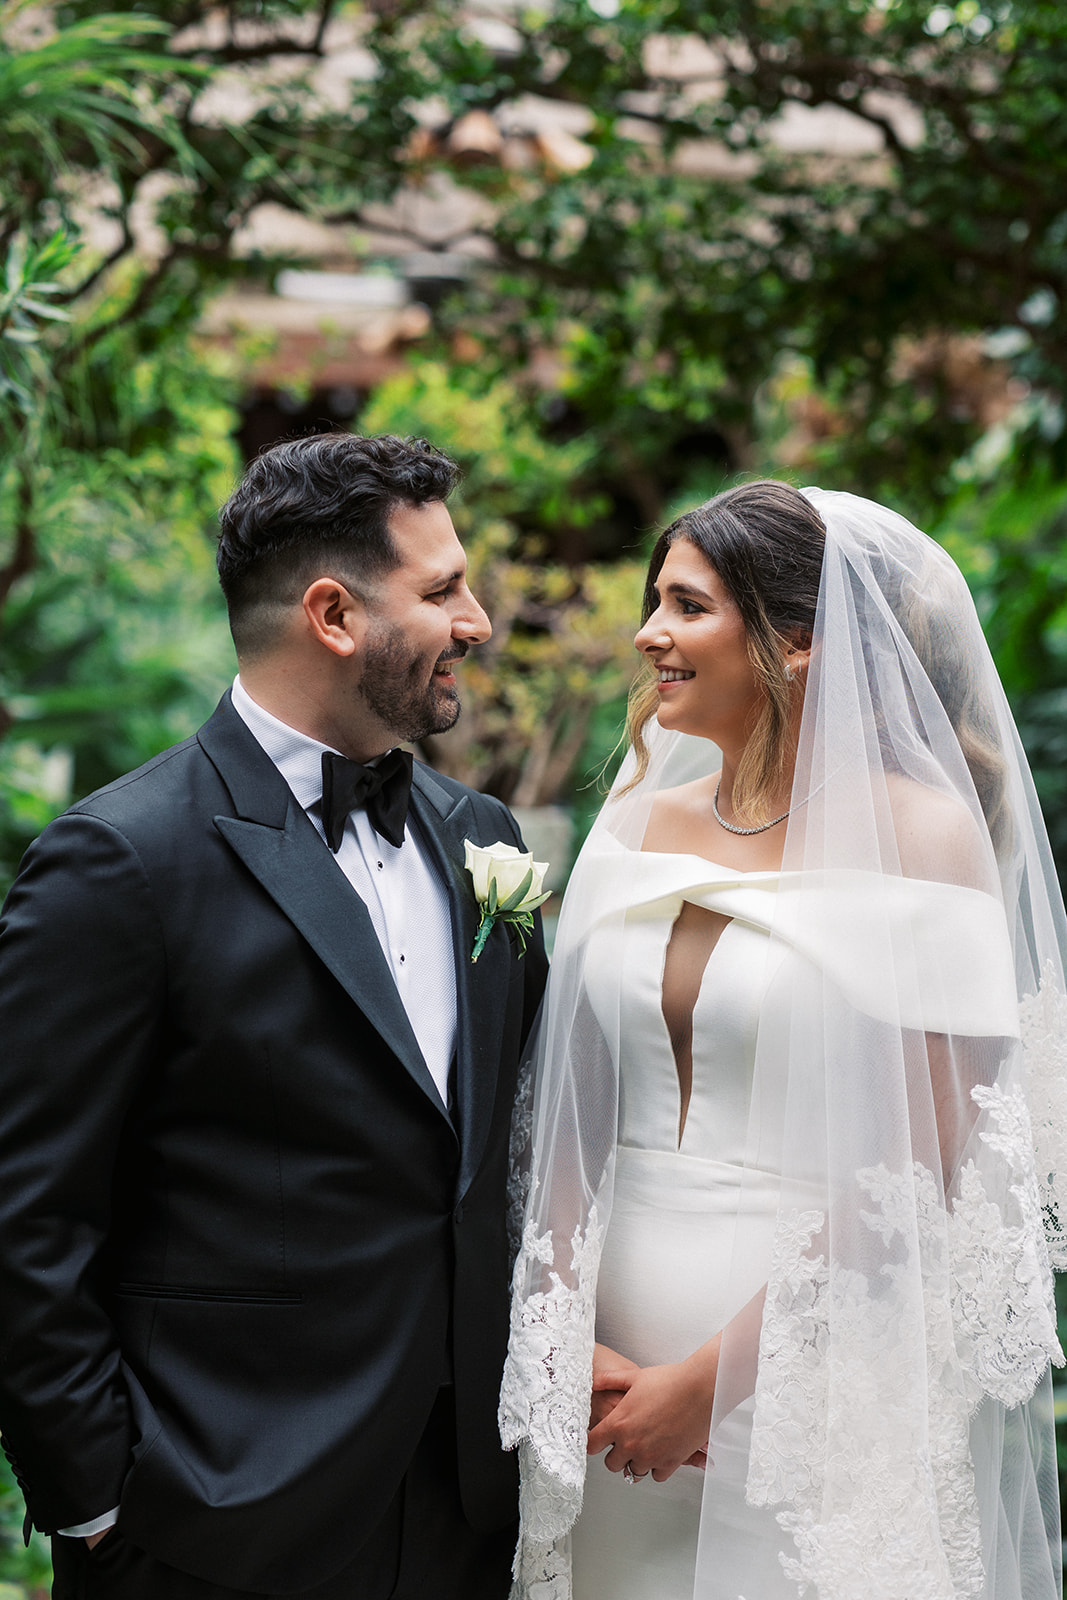 Newlyweds stand in a garden while wearing a black tuxedo and white silk dress with long embroidered veil at The Royal Manor Wedding venue